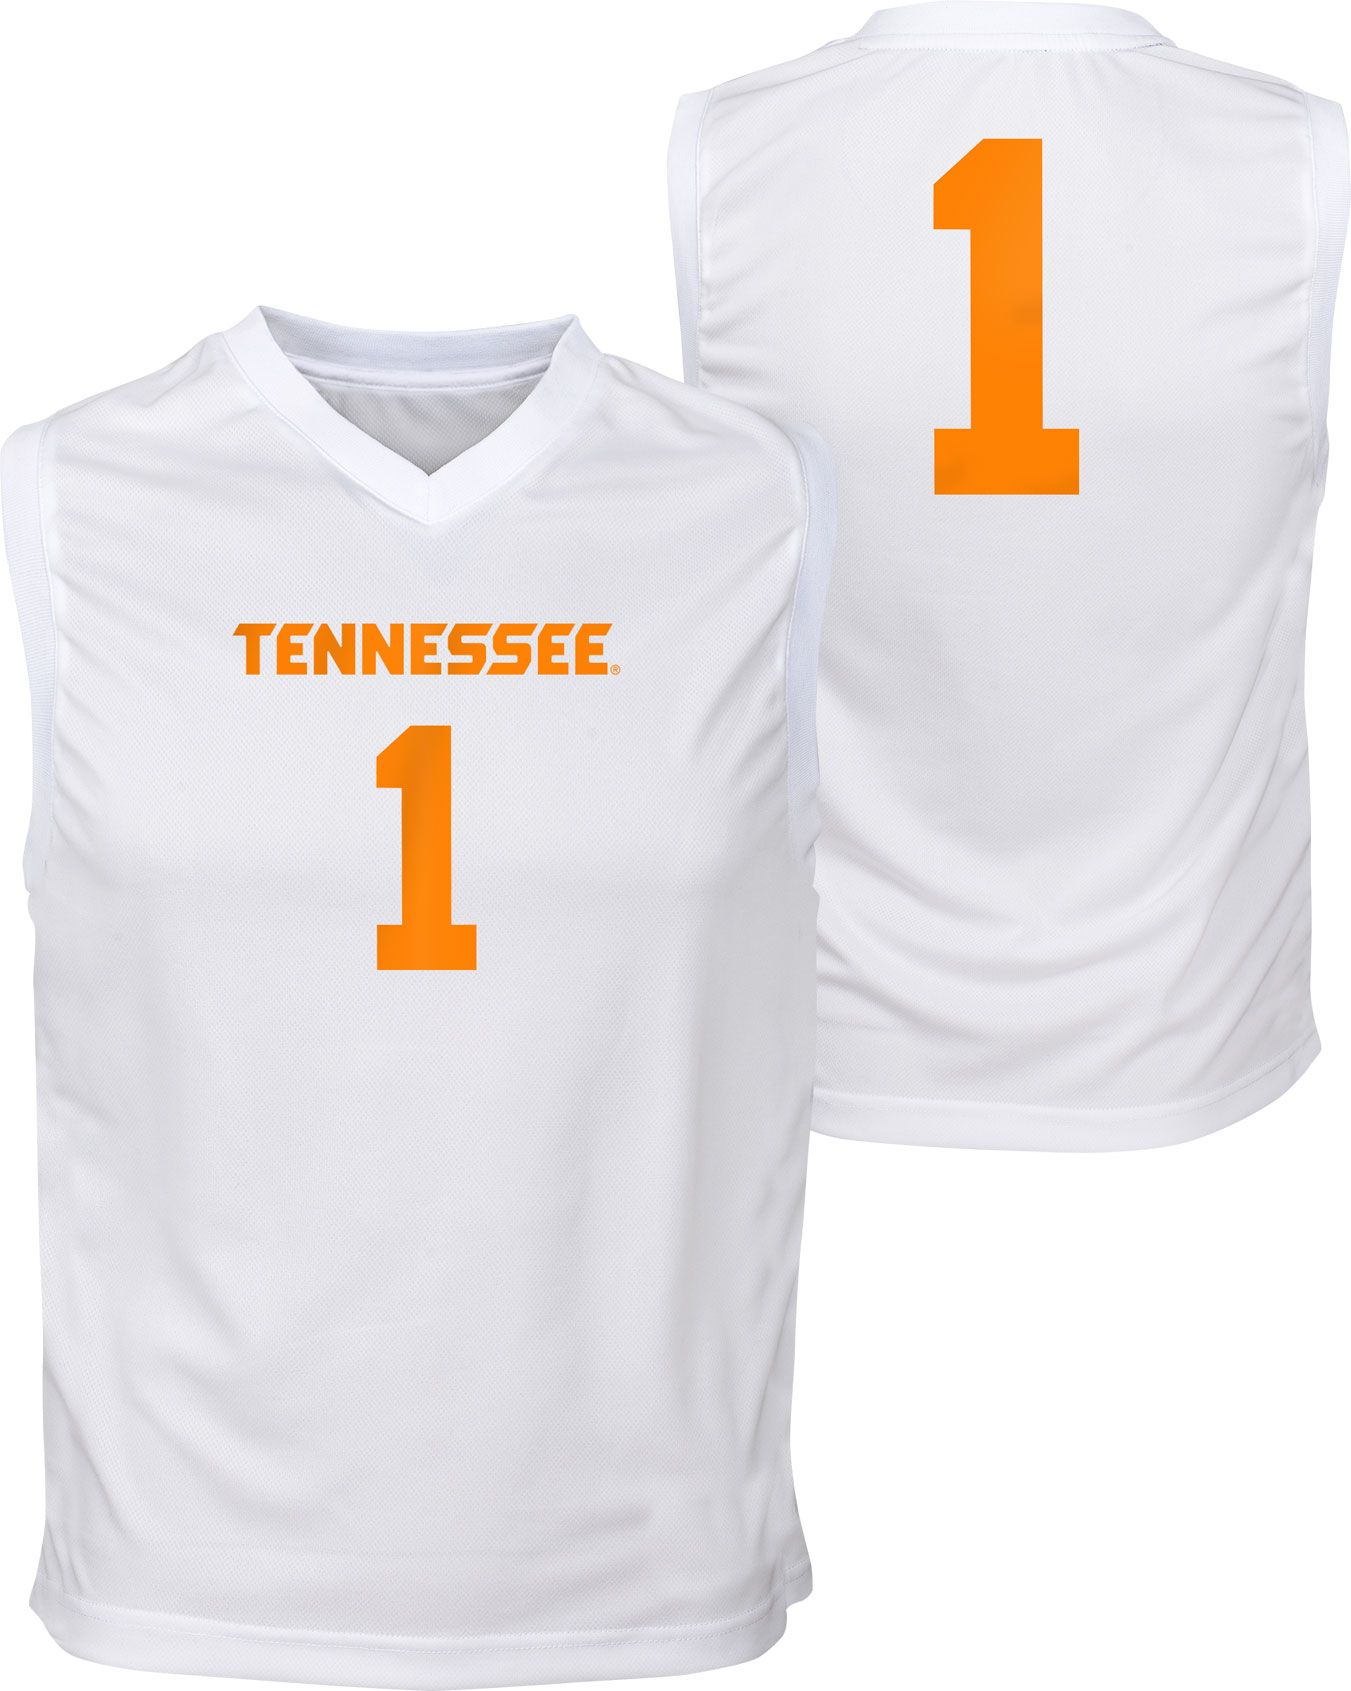 Gen2 Youth Tennessee Volunteers #1 White Replica Jersey